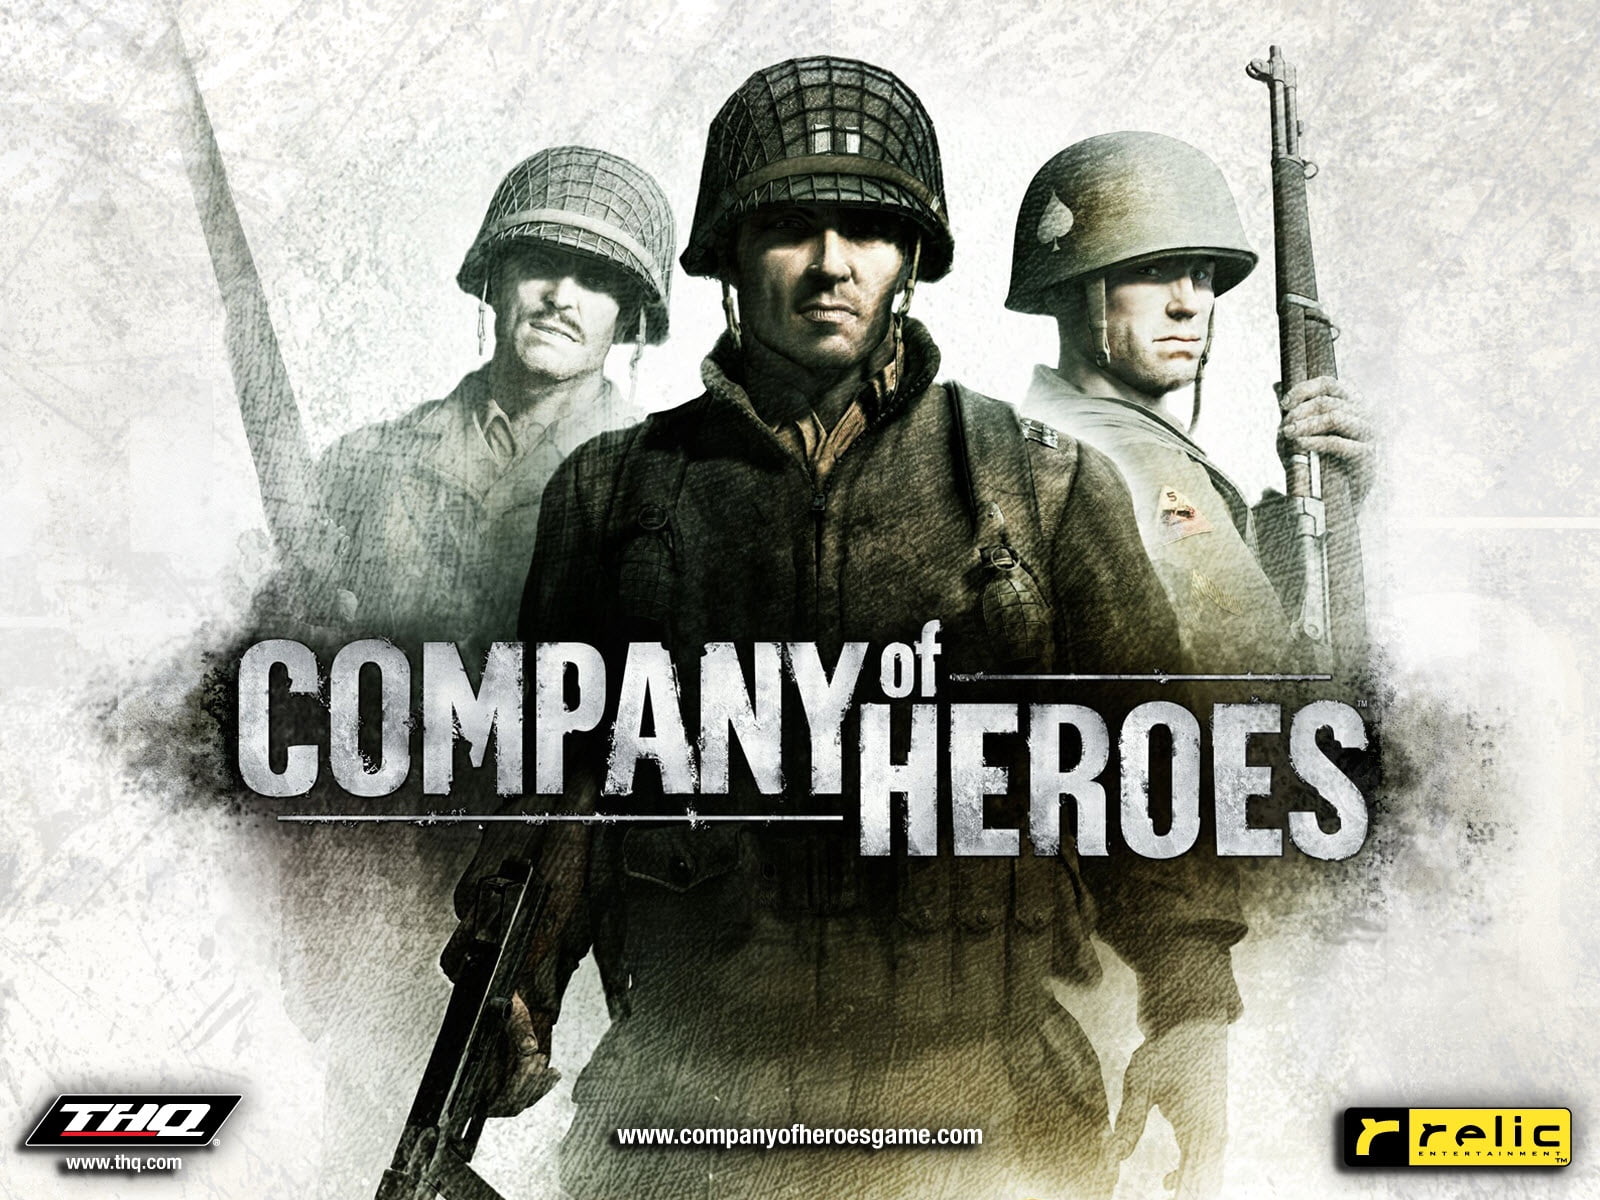 Company Of Heroes game wallpaper screenshot, coh, soldiers, army